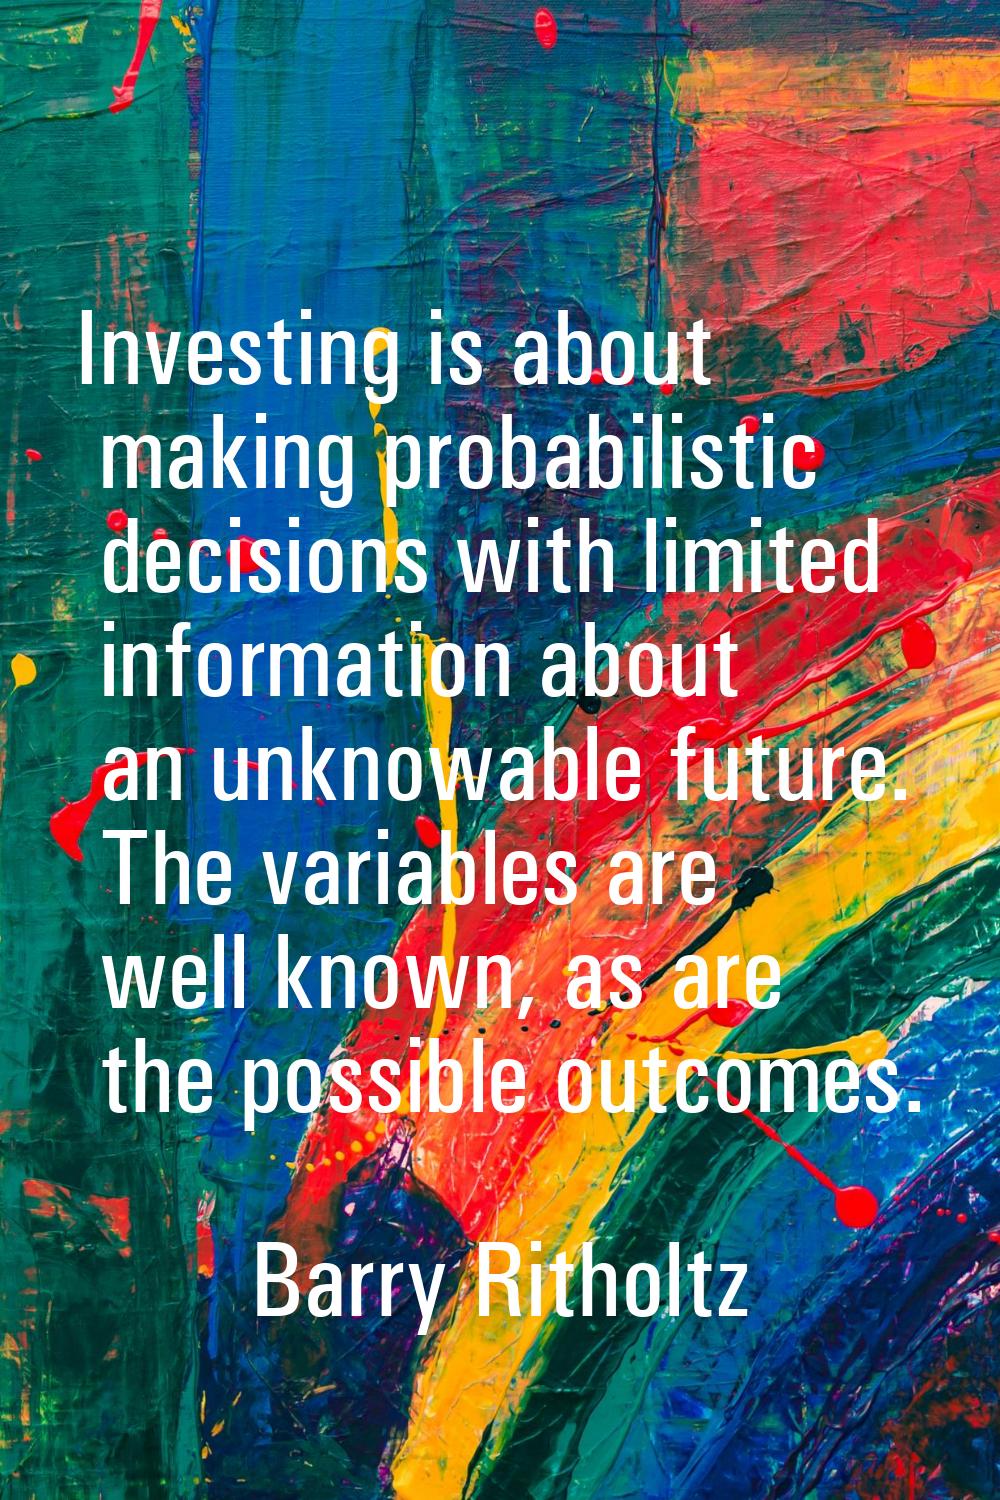 Investing is about making probabilistic decisions with limited information about an unknowable futu